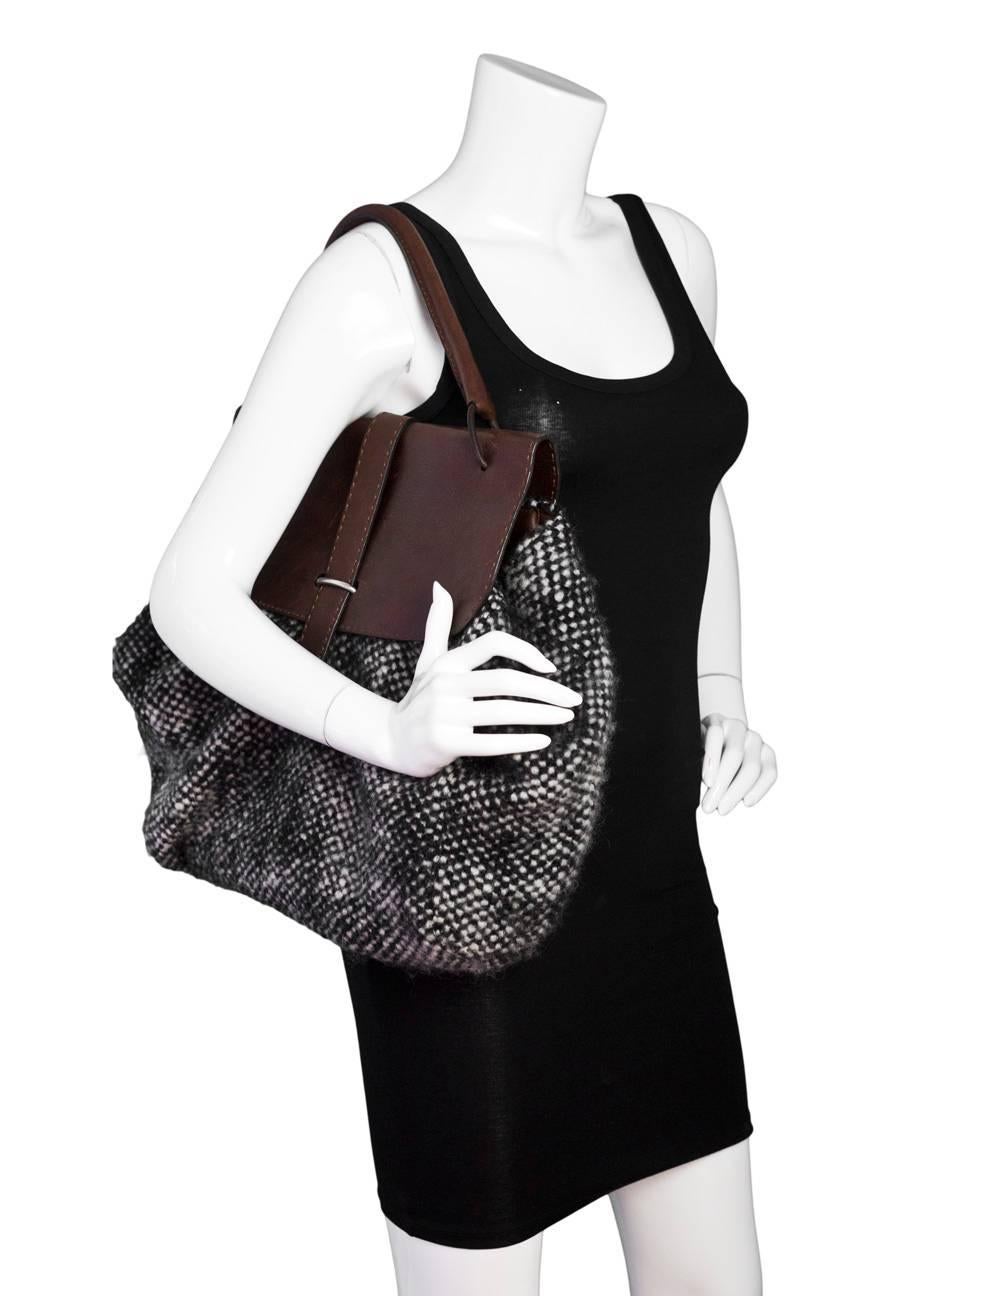 Marni Black and White Tweed Top Handle Bag

Made In: Italy
Color: Black, white, brown
Hardware: Silvertone
Materials: Wool, leather
Lining: Beige textile
Closure/Opening: Flap top with tab closure
Exterior Pockets: None
Interior Pockets: Zip wall